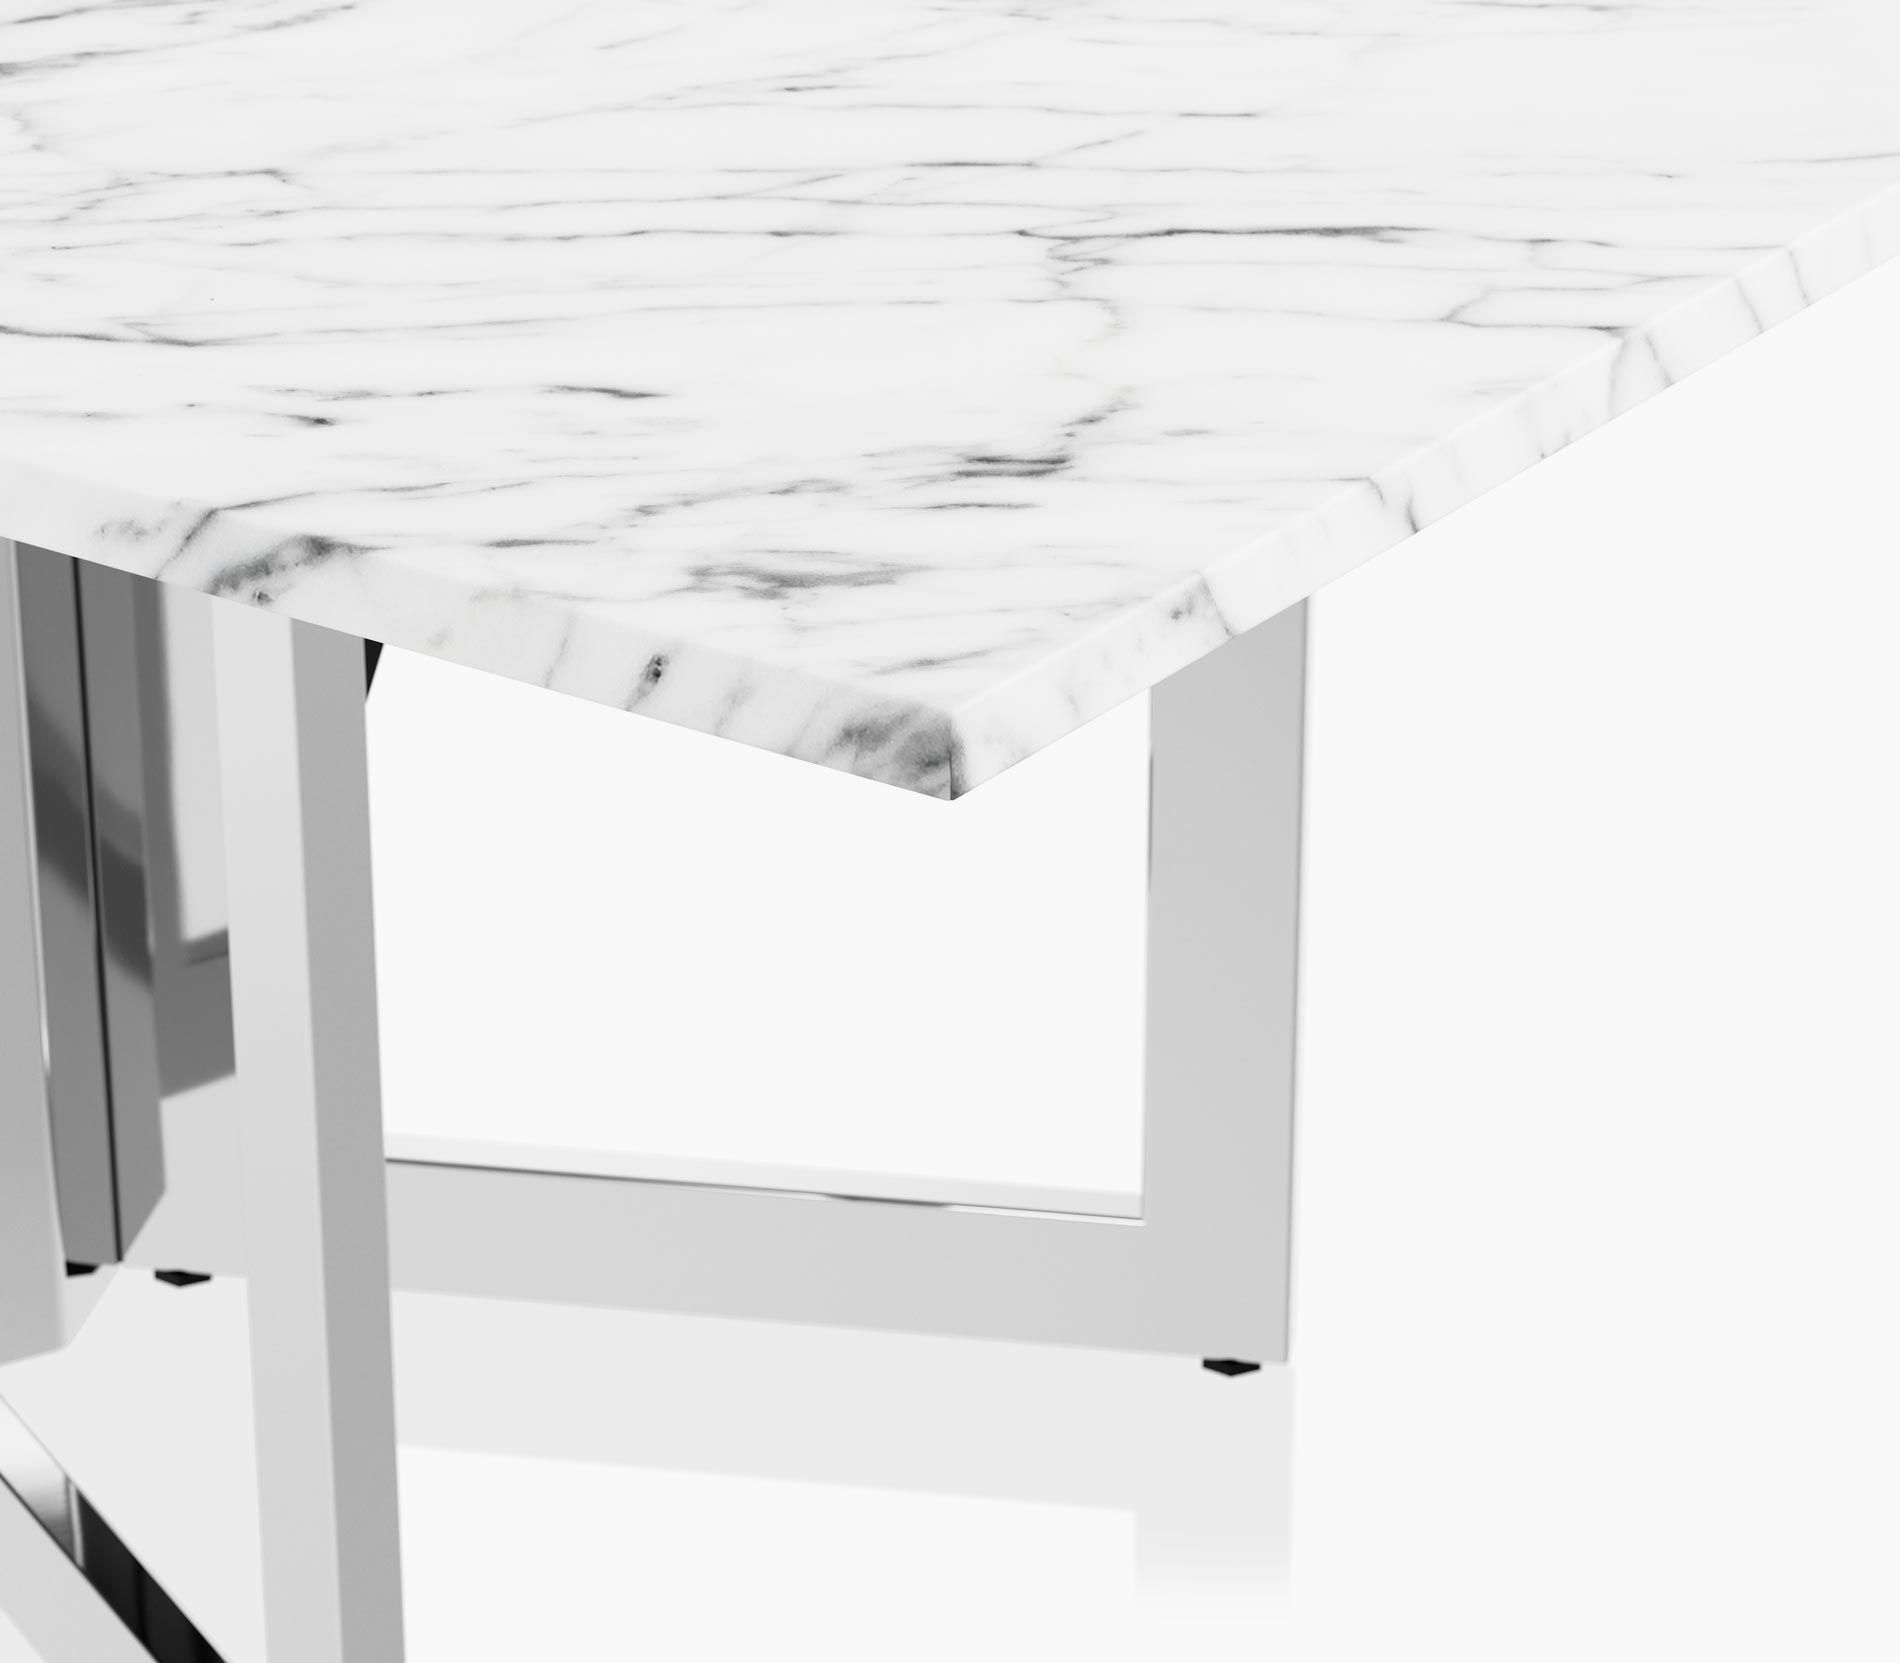 Edge detail on a Highline Vector Conference Table in arabescato corchia marble with a polished chrome base